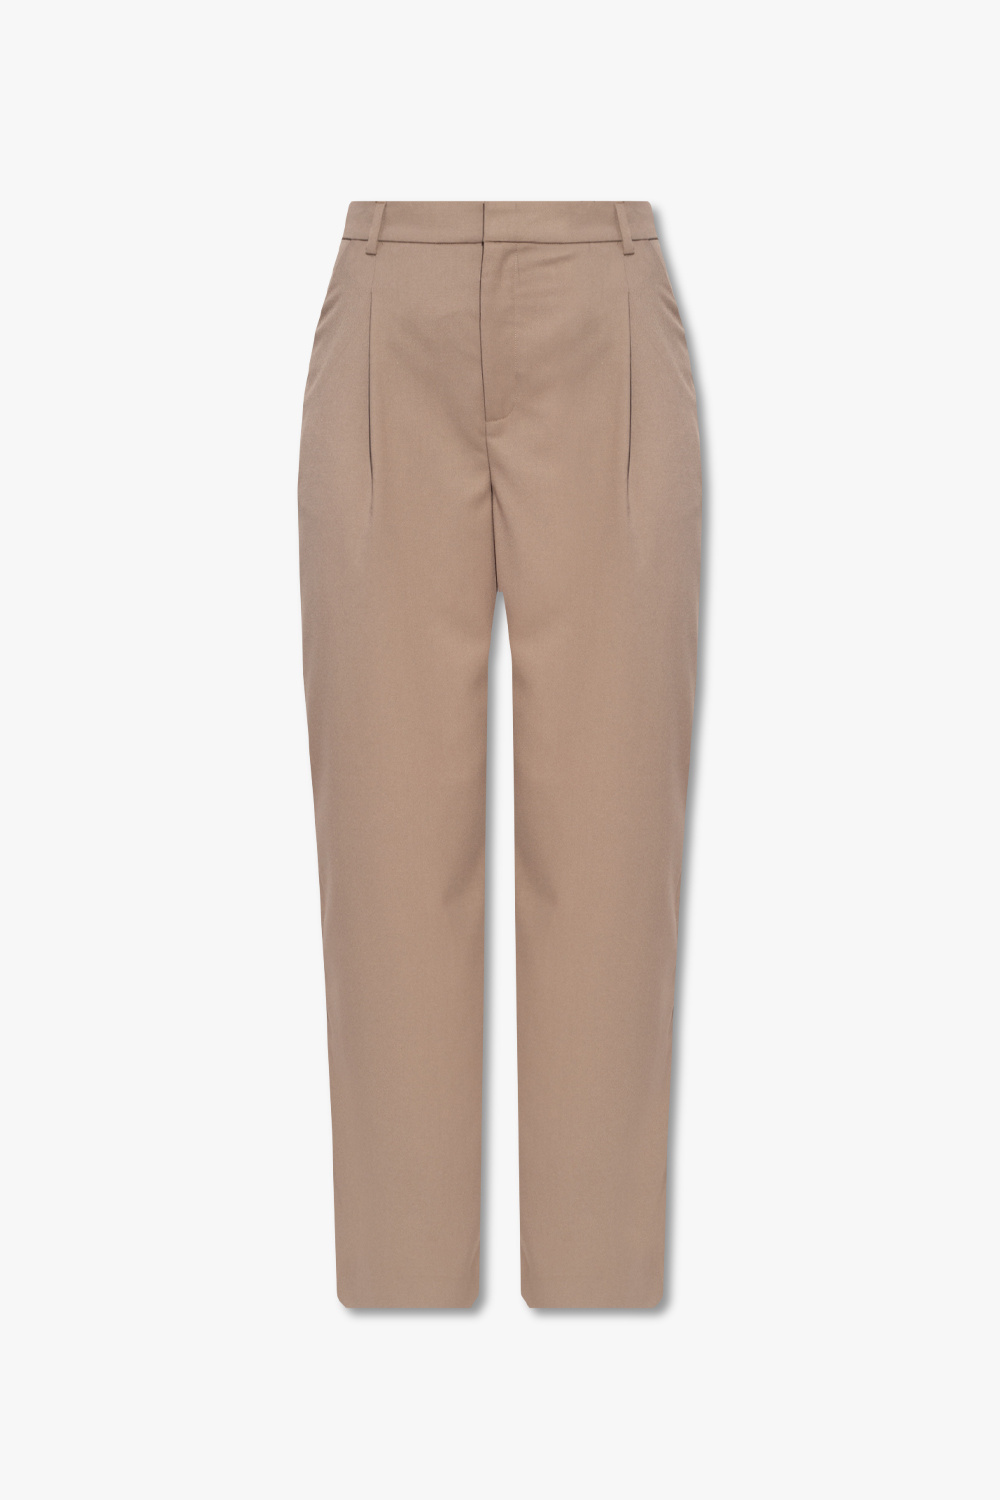 Gestuz ‘PaulaGZ’ trousers with wide legs